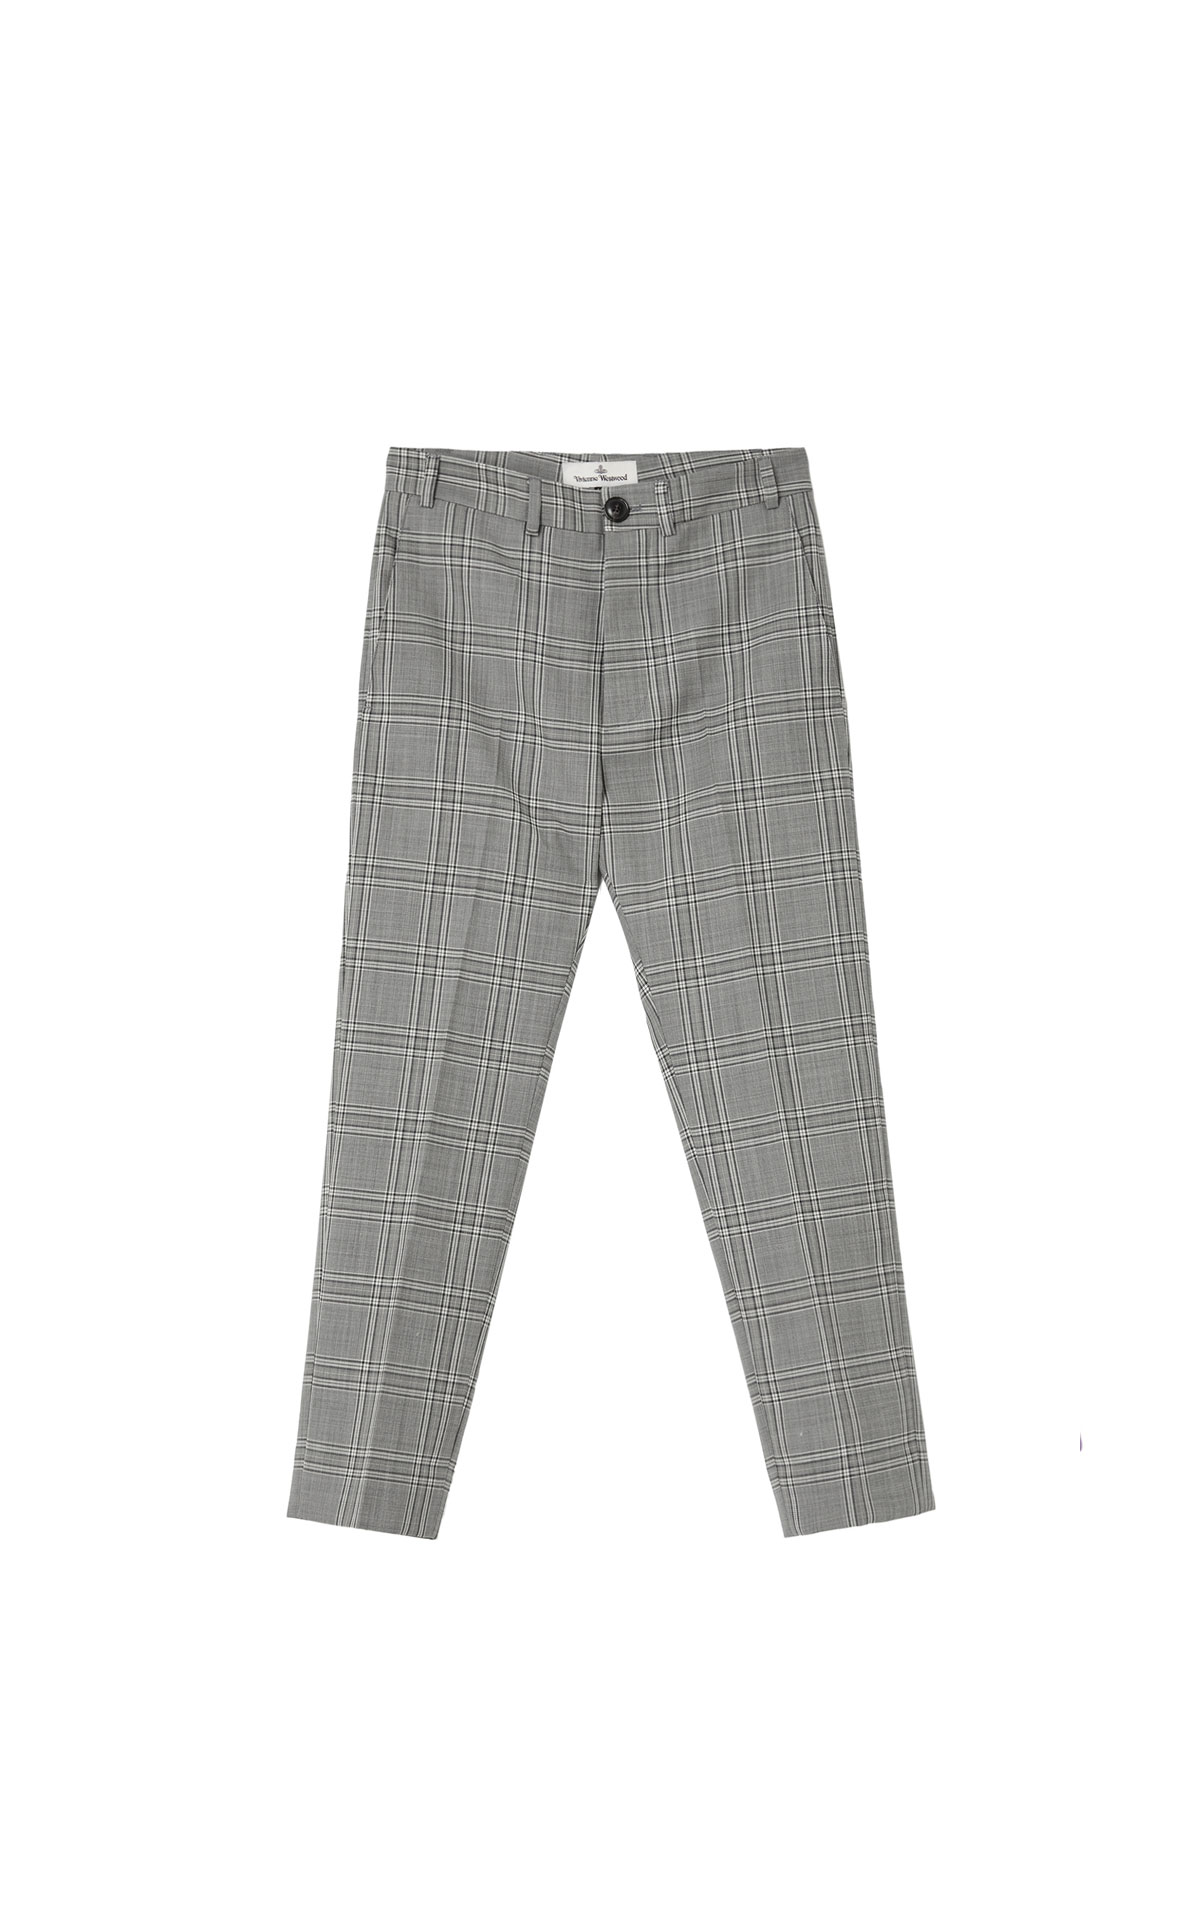 Vivienne Westwood Classic trousers grey from Bicester Village